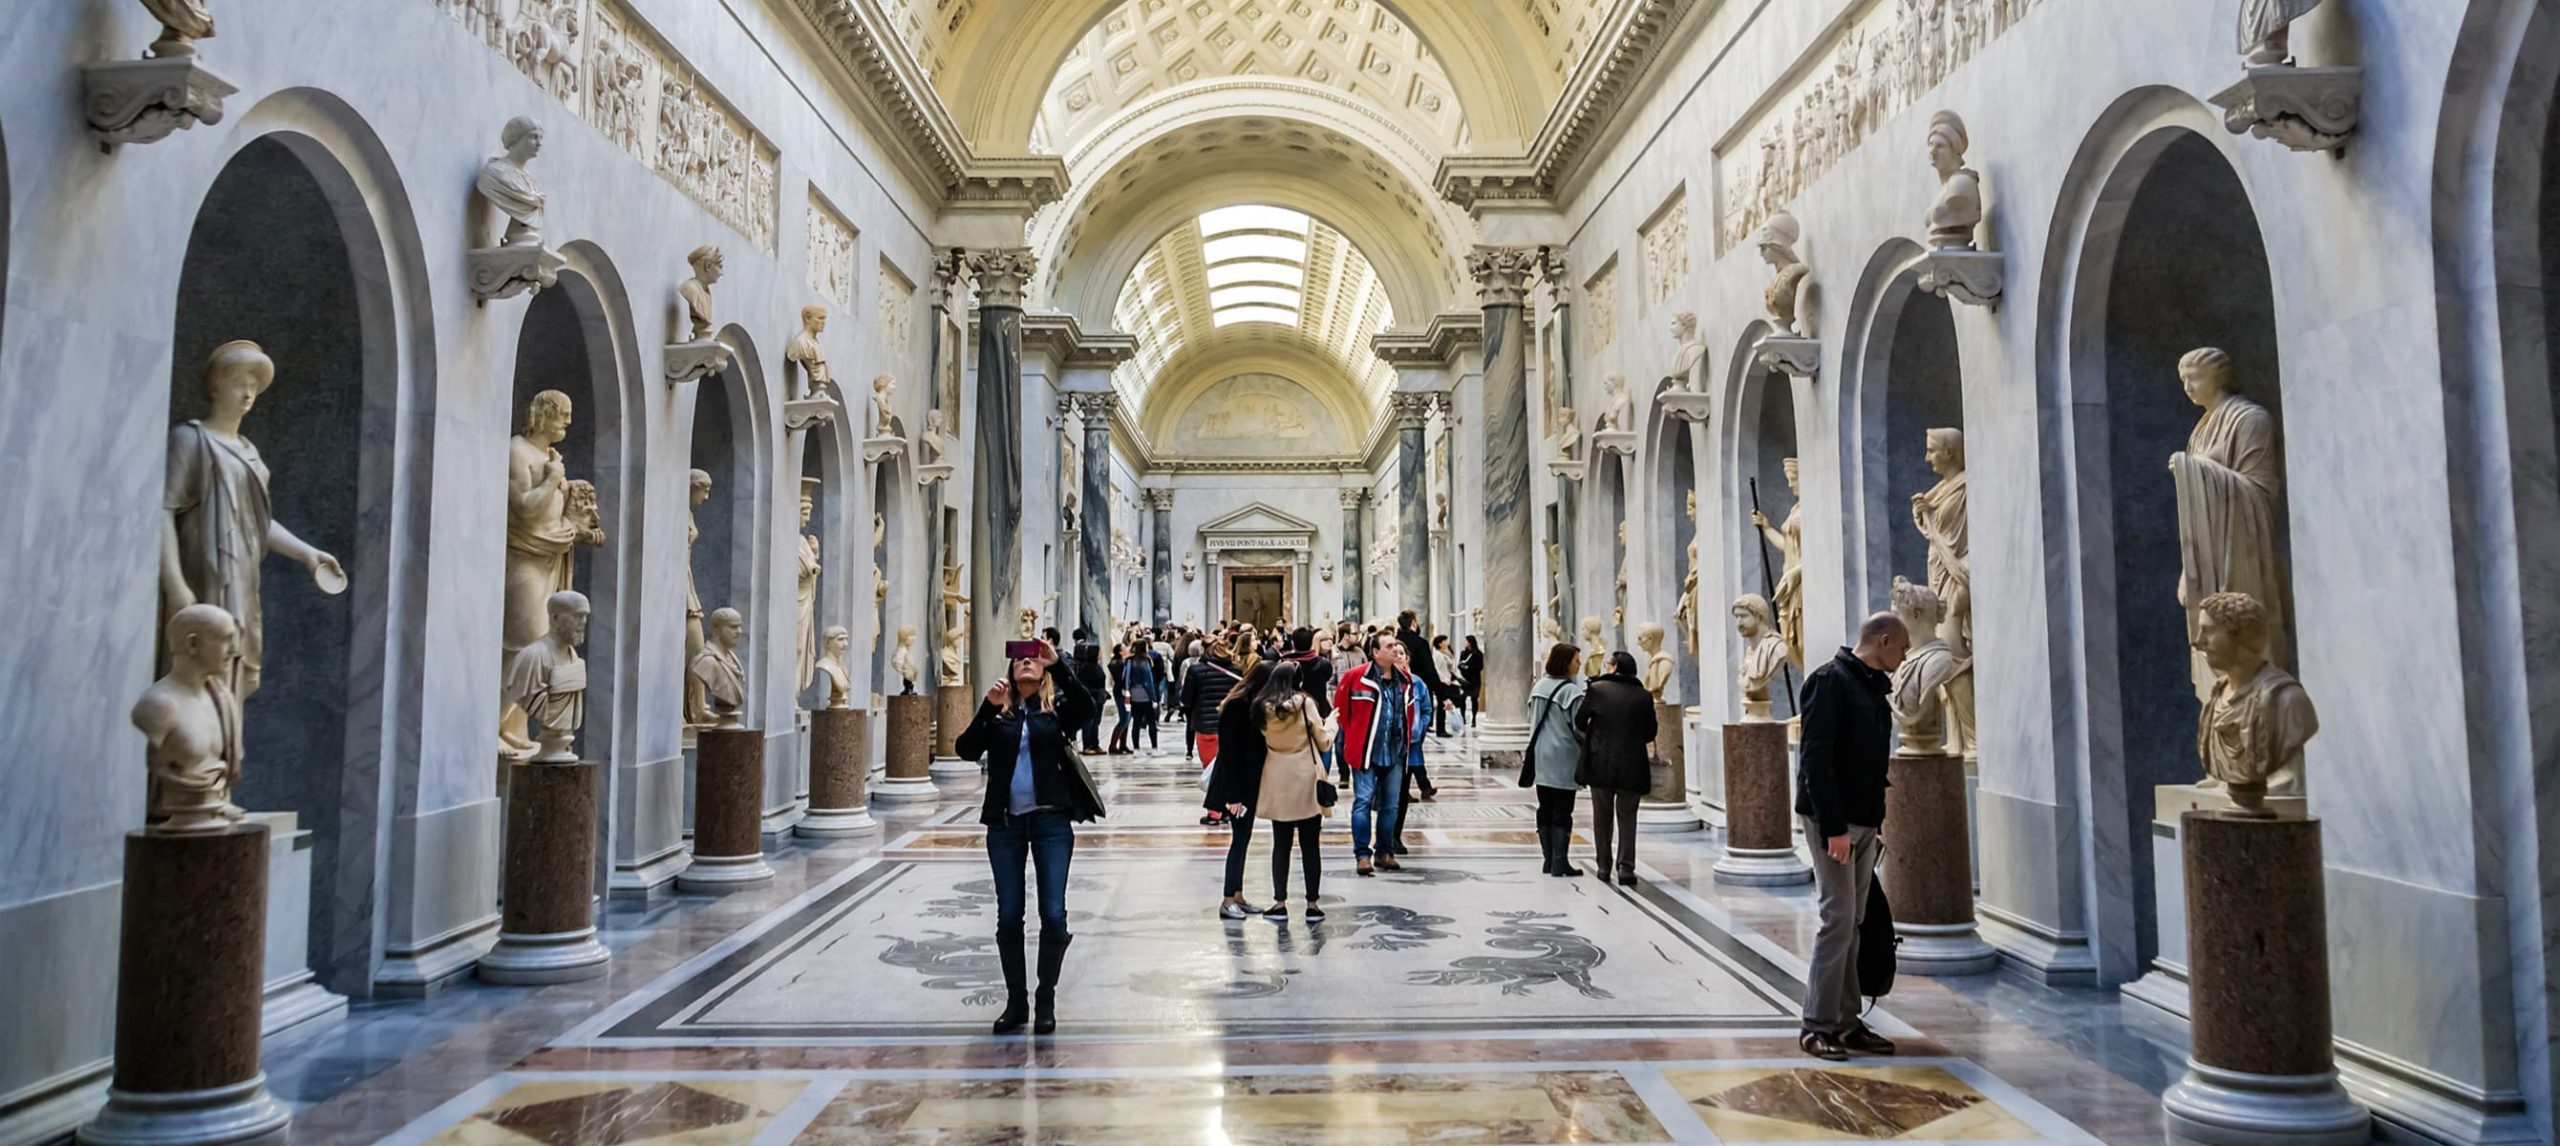 People visiting The Vatican Museums, in Rome, Italy.